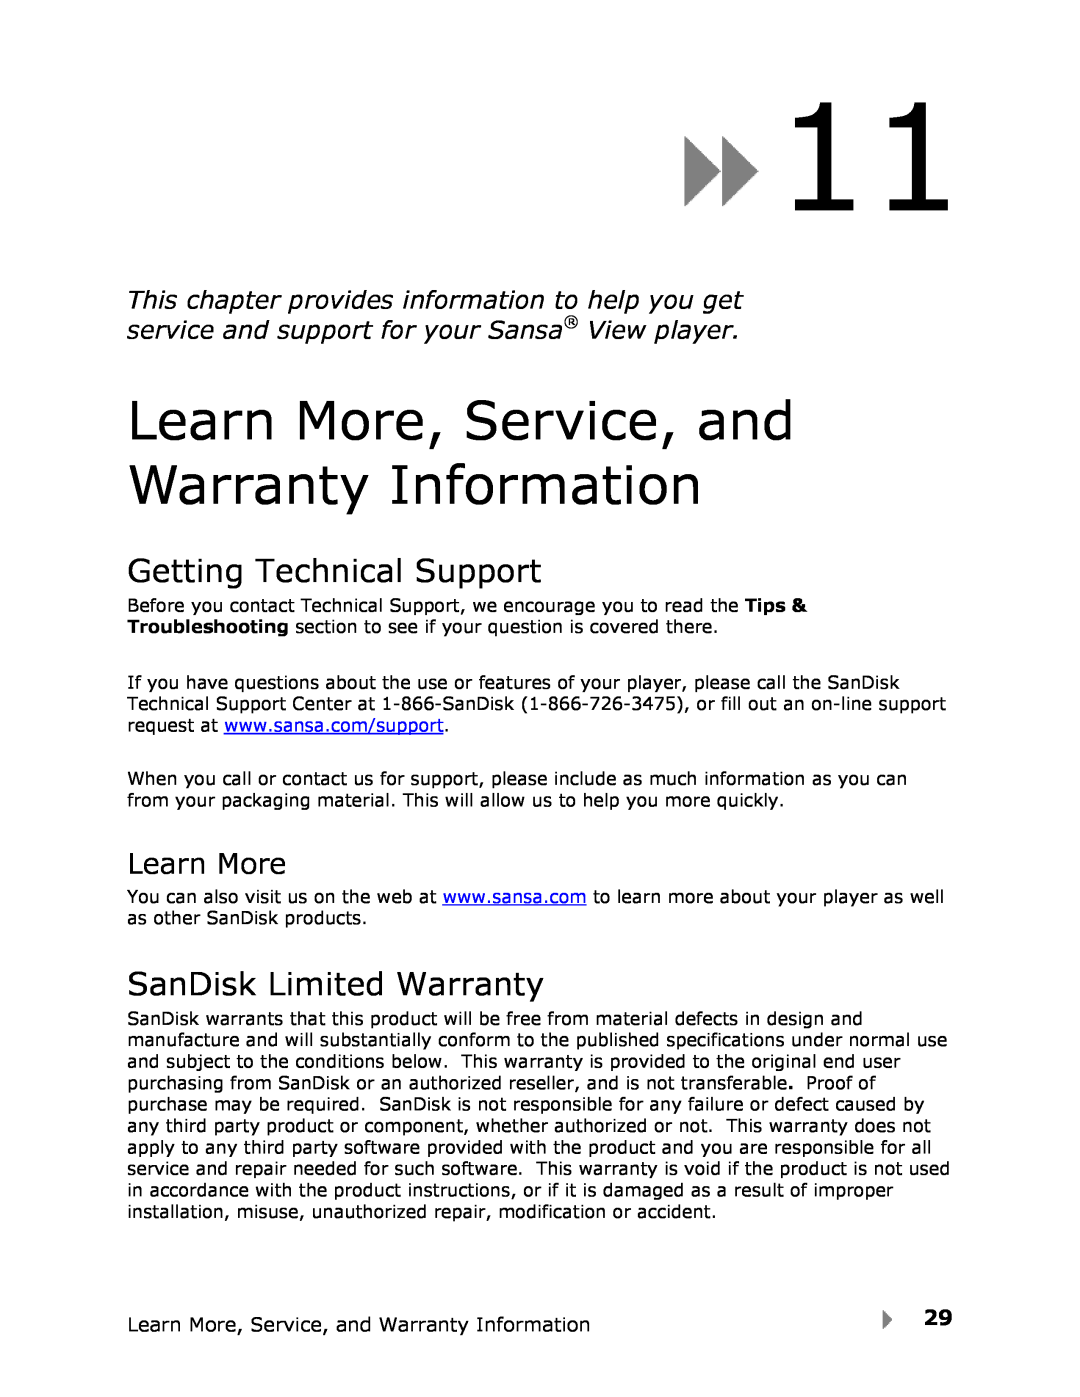 SanDisk View user manual Learn More, Service, and Warranty Information, Getting Technical Support, SanDisk Limited Warranty 